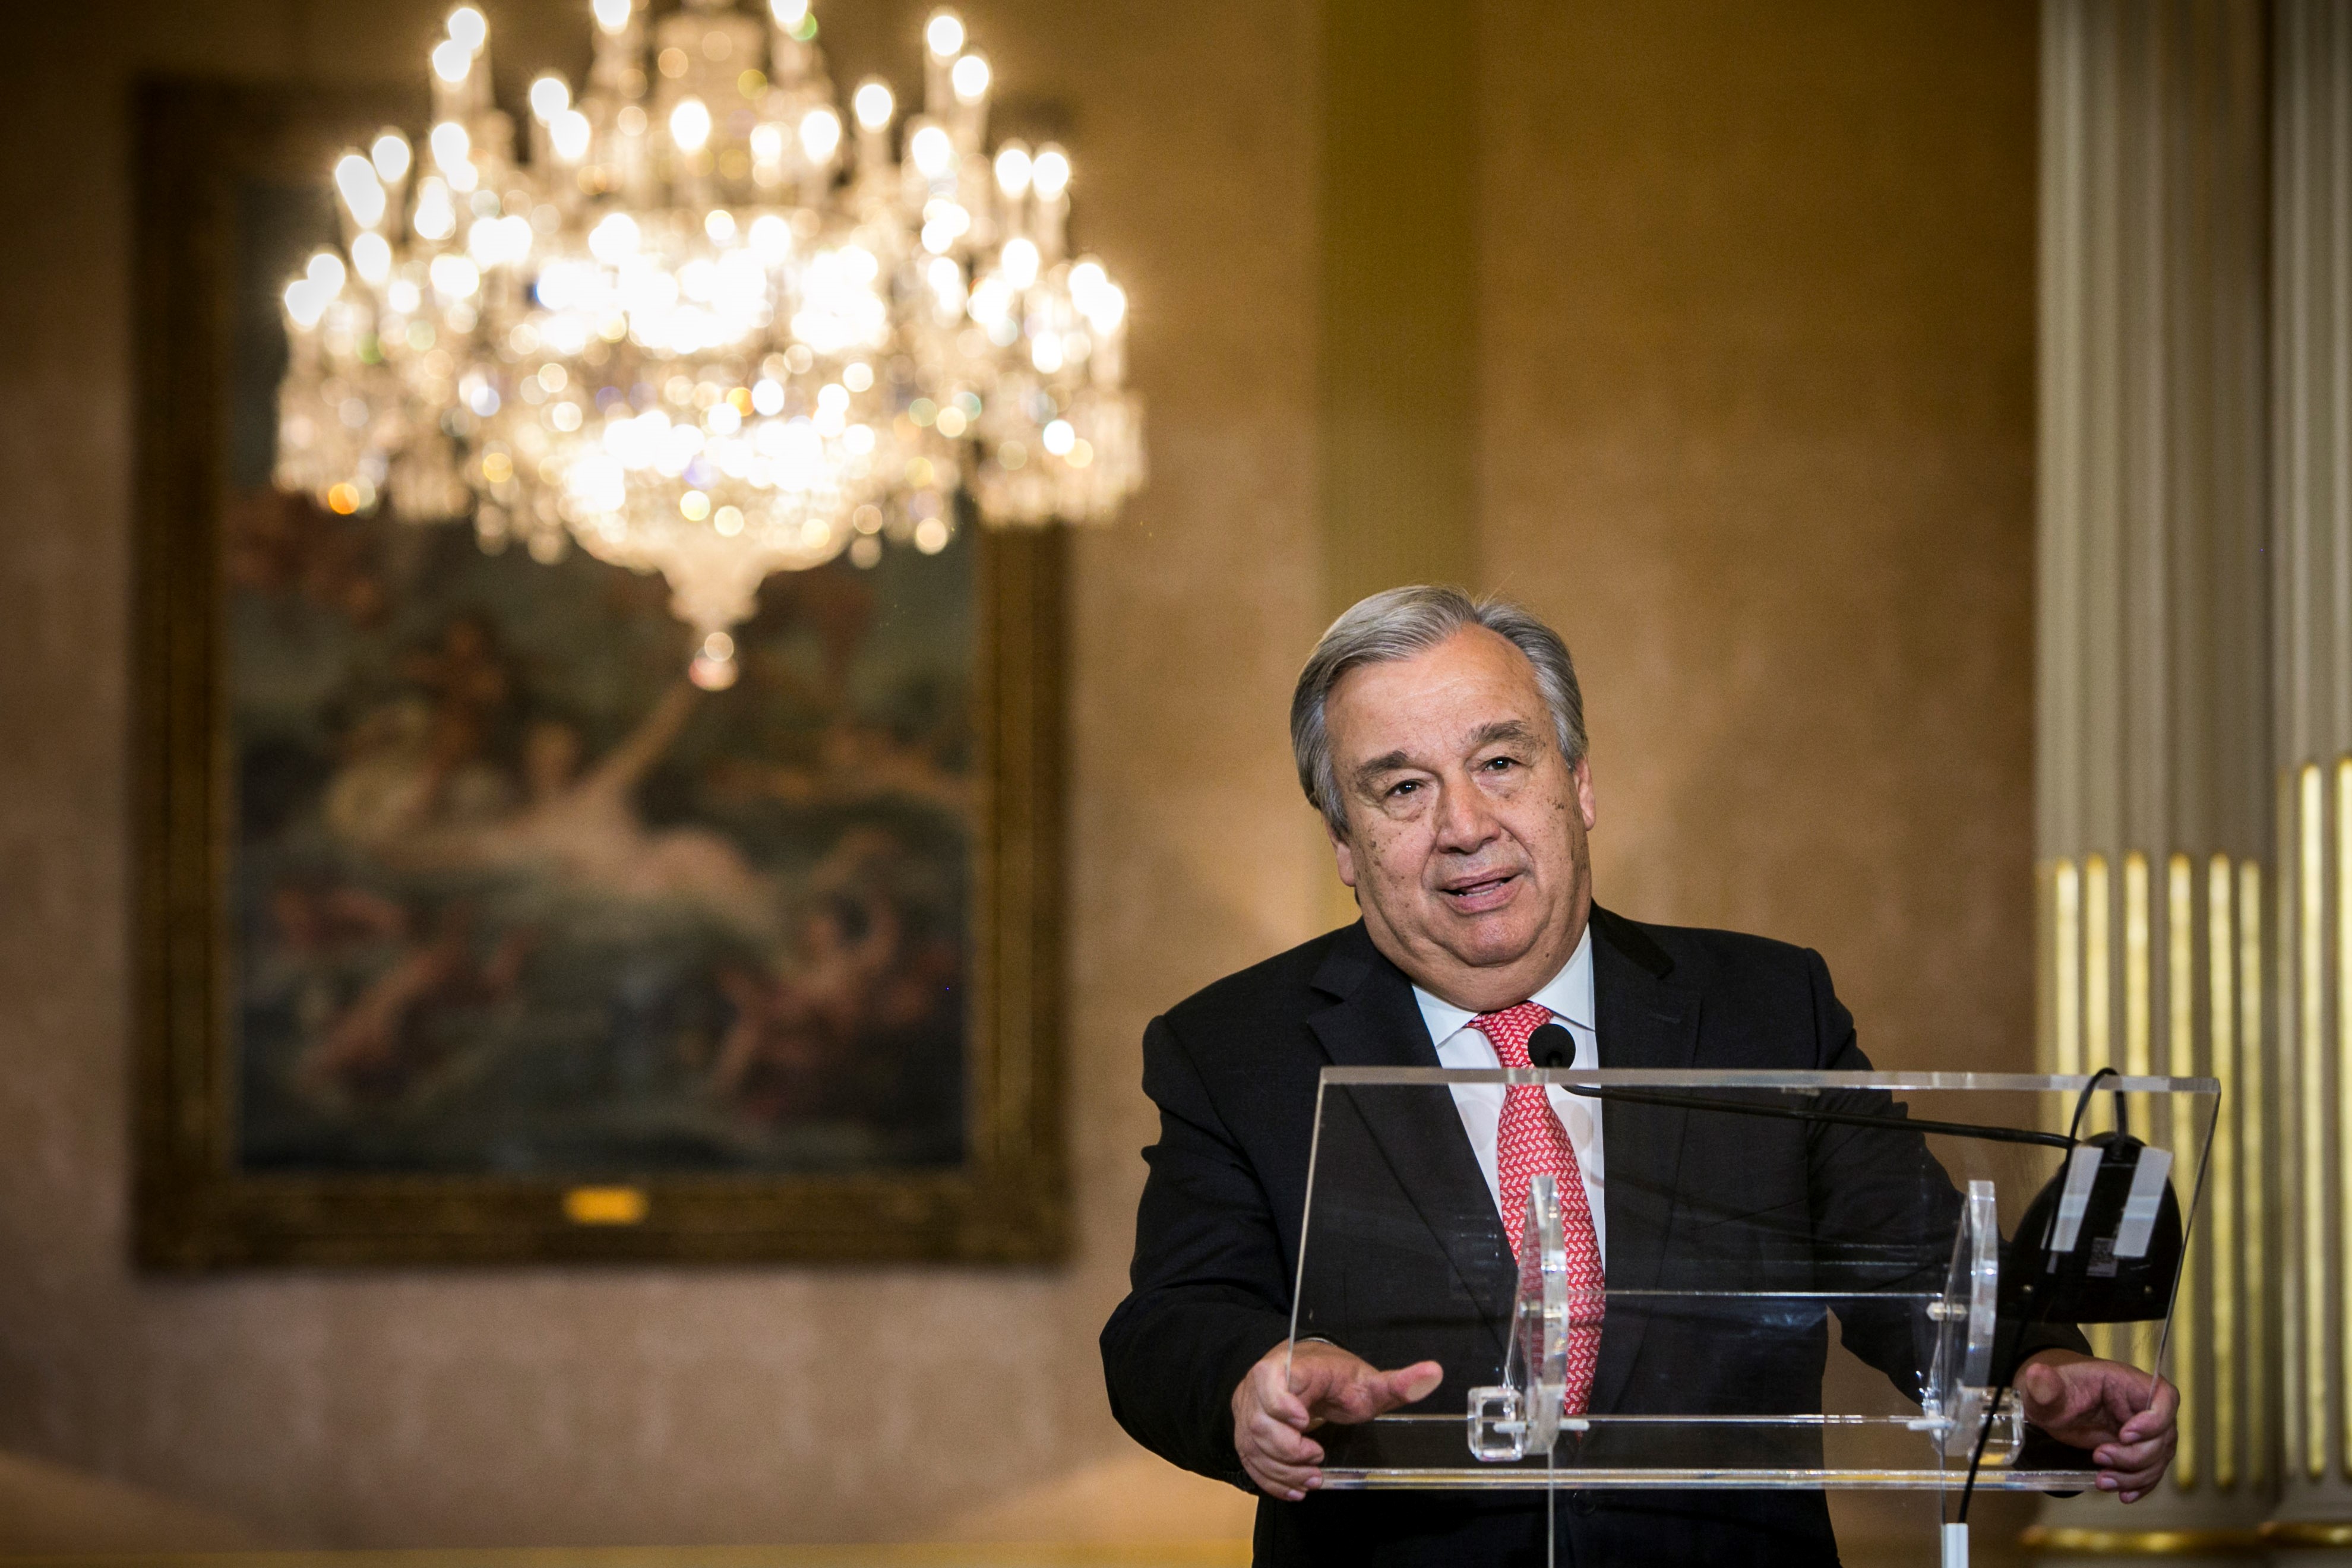 New appointed United Nations general secretary Antonio Guterres delivers a speech during a press conference in Lisbon, Portugal on October 6, 2016. (Rodrigo Cabrita—Anadolu Agency/Getty Images)